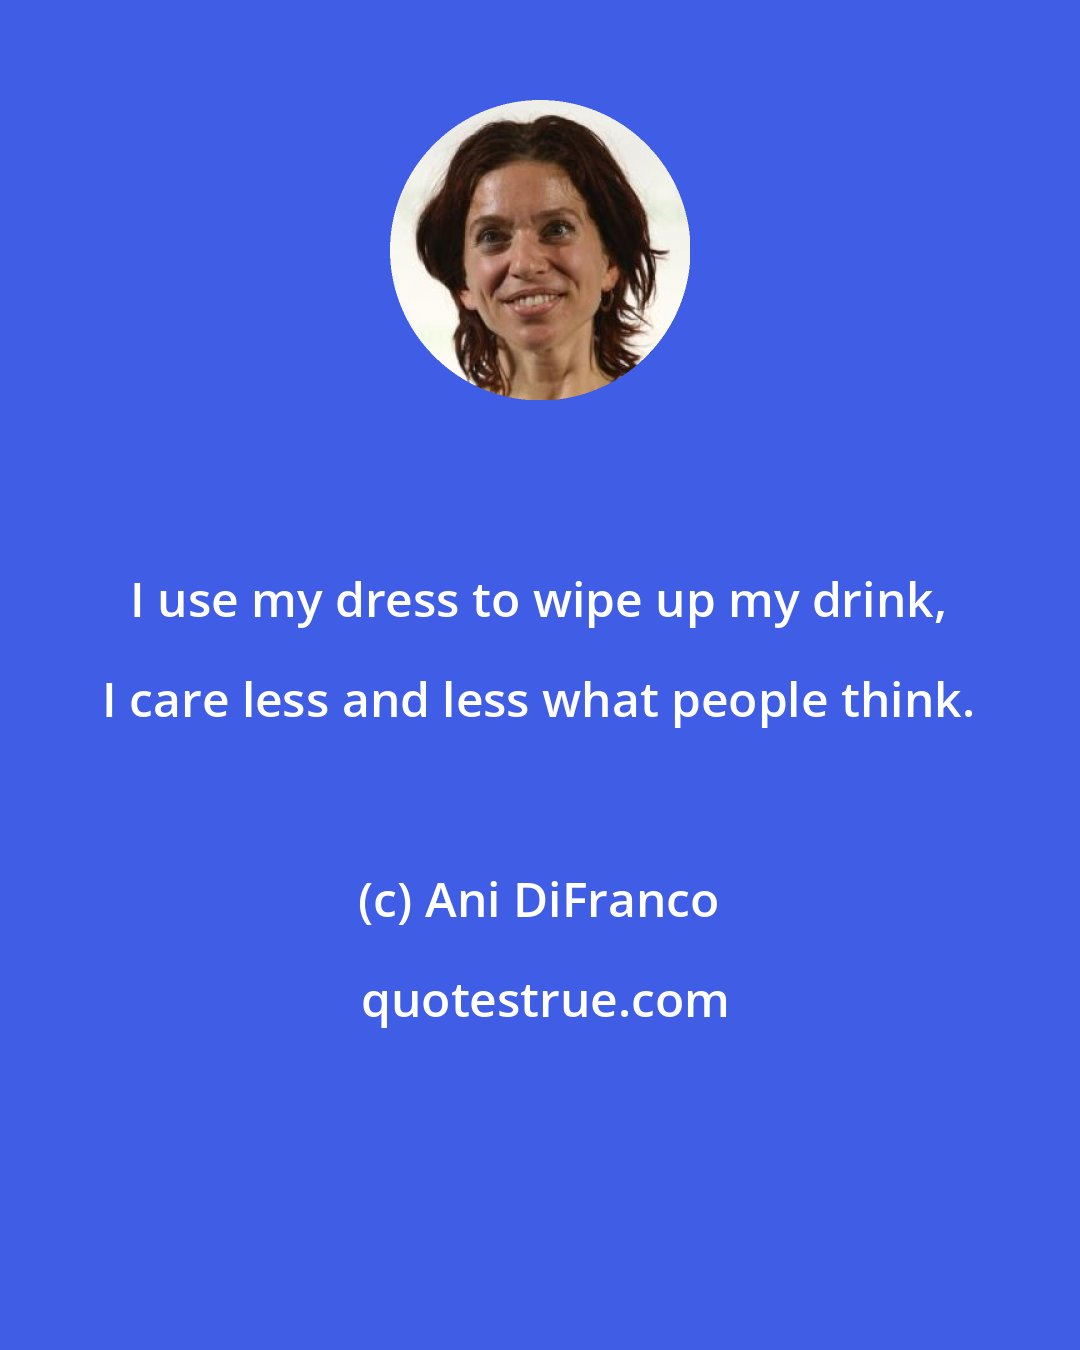 Ani DiFranco: I use my dress to wipe up my drink, I care less and less what people think.